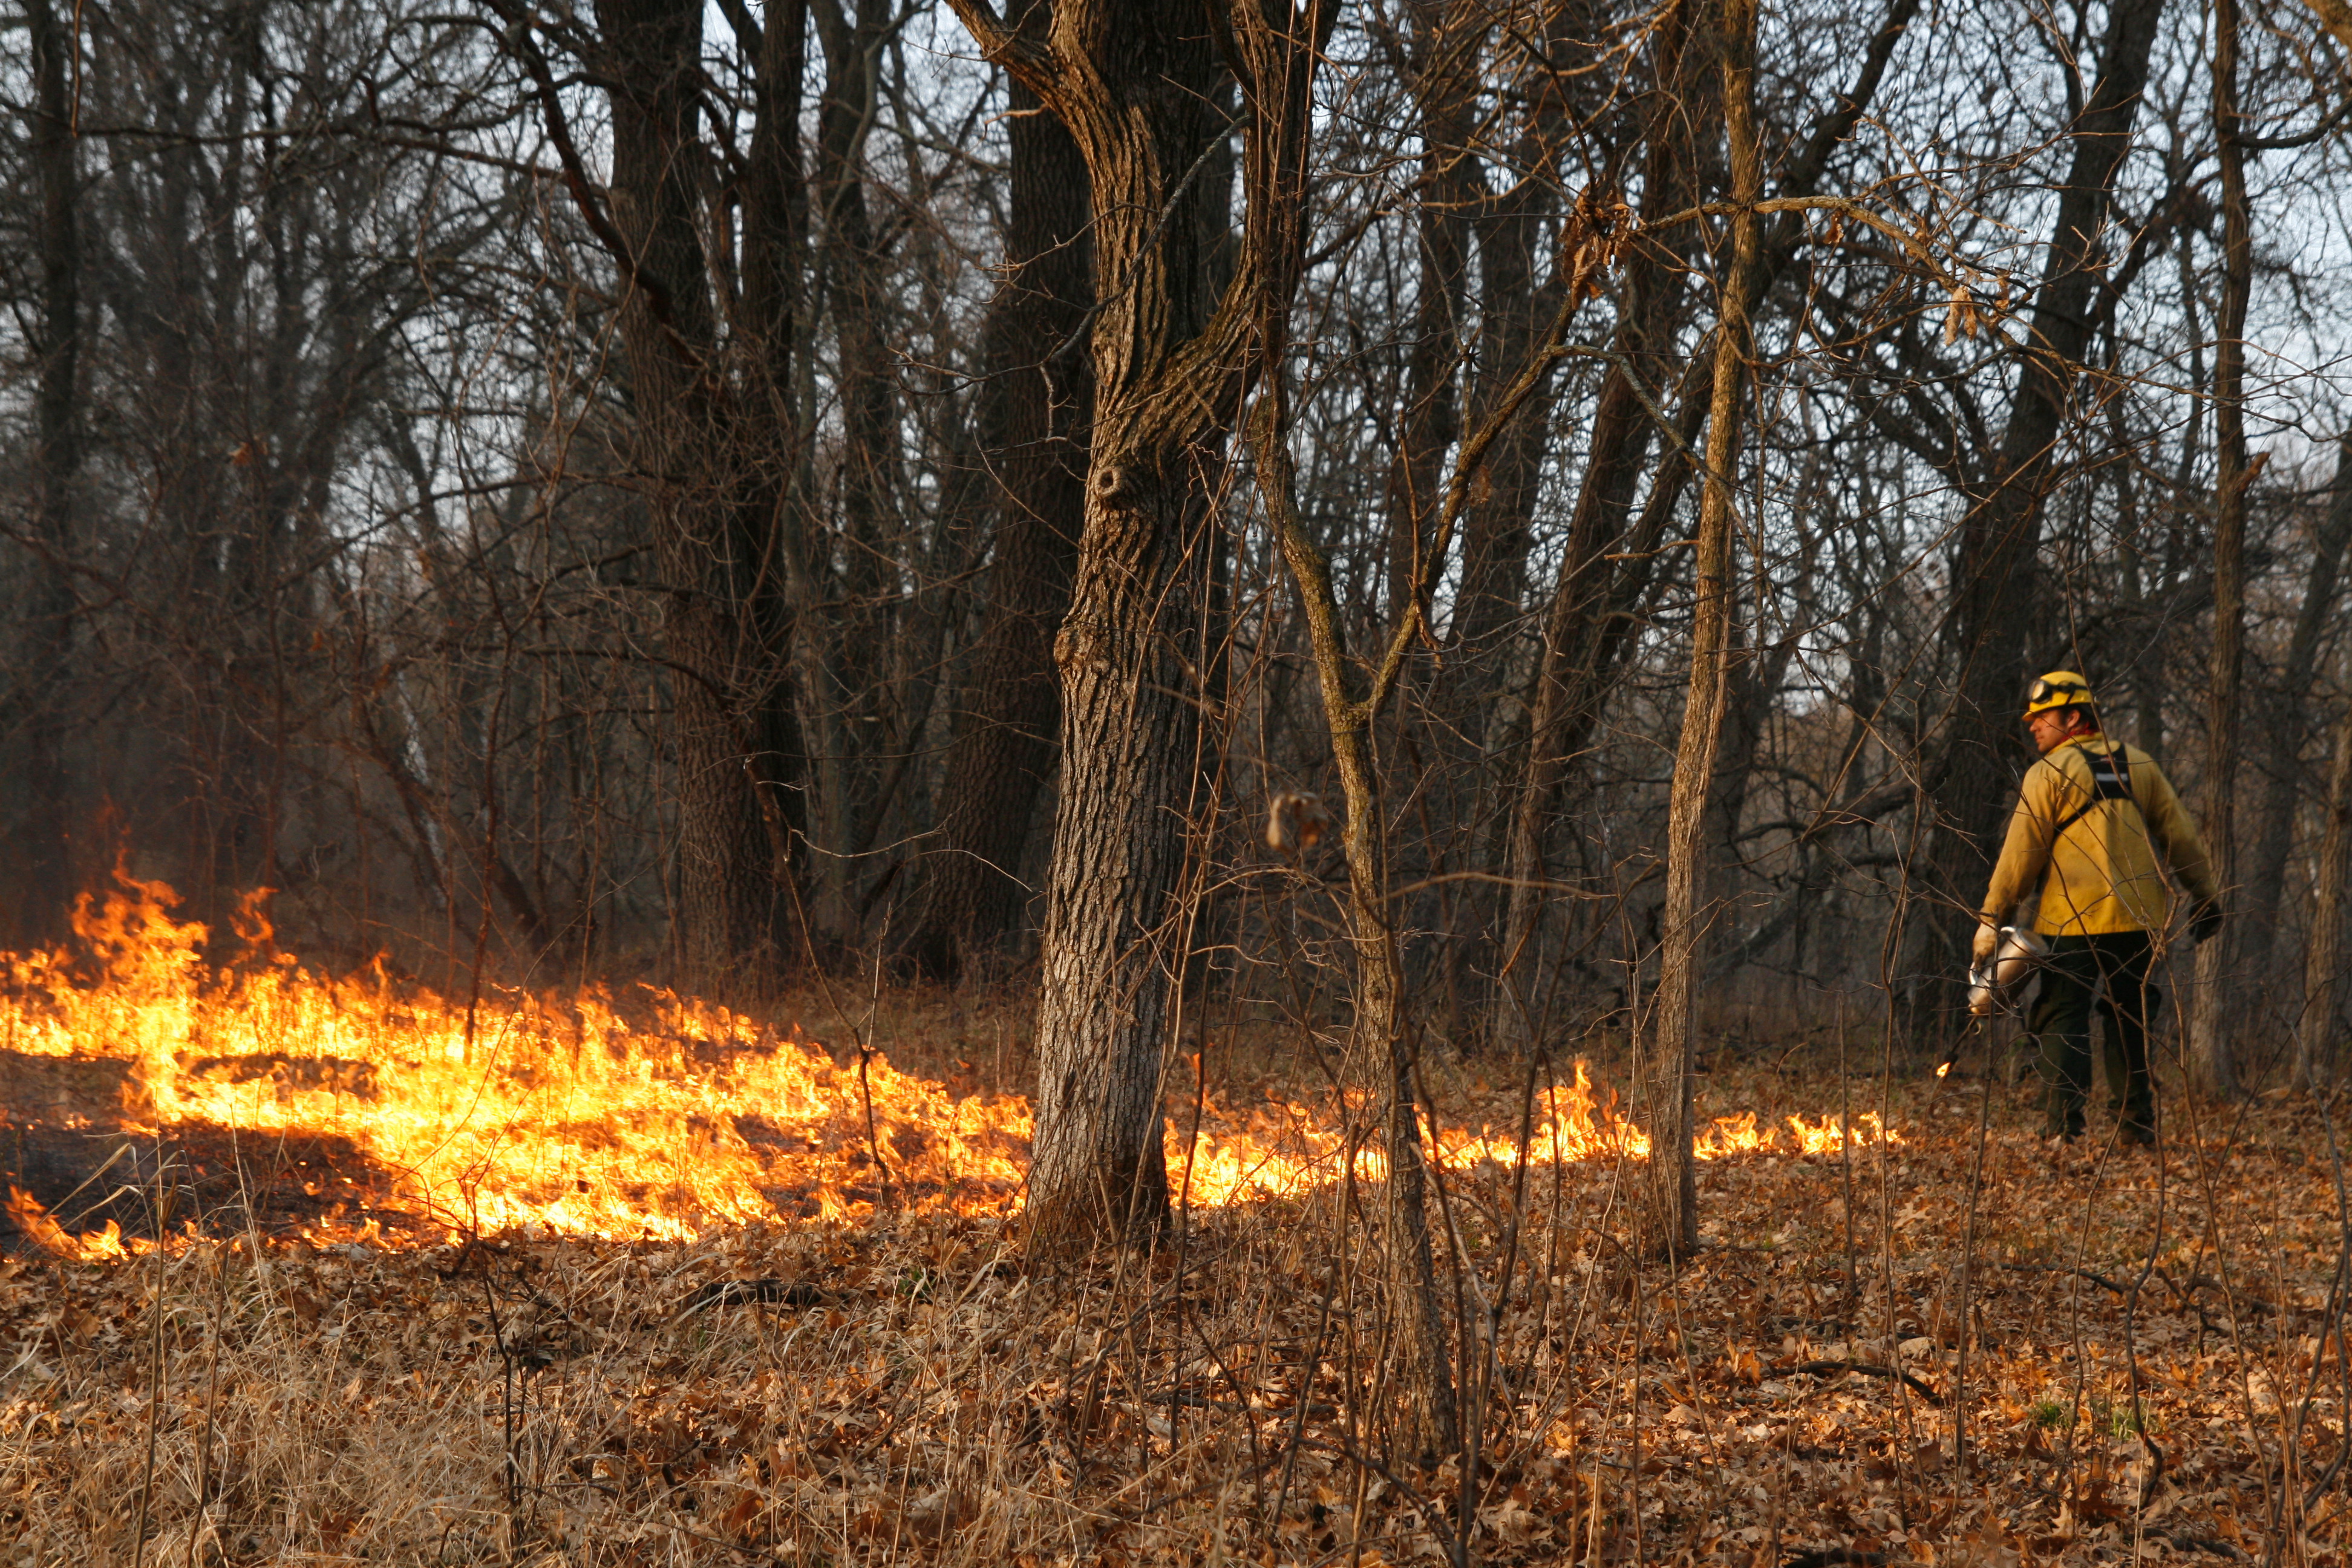 low fire in presecribed burn area under trees